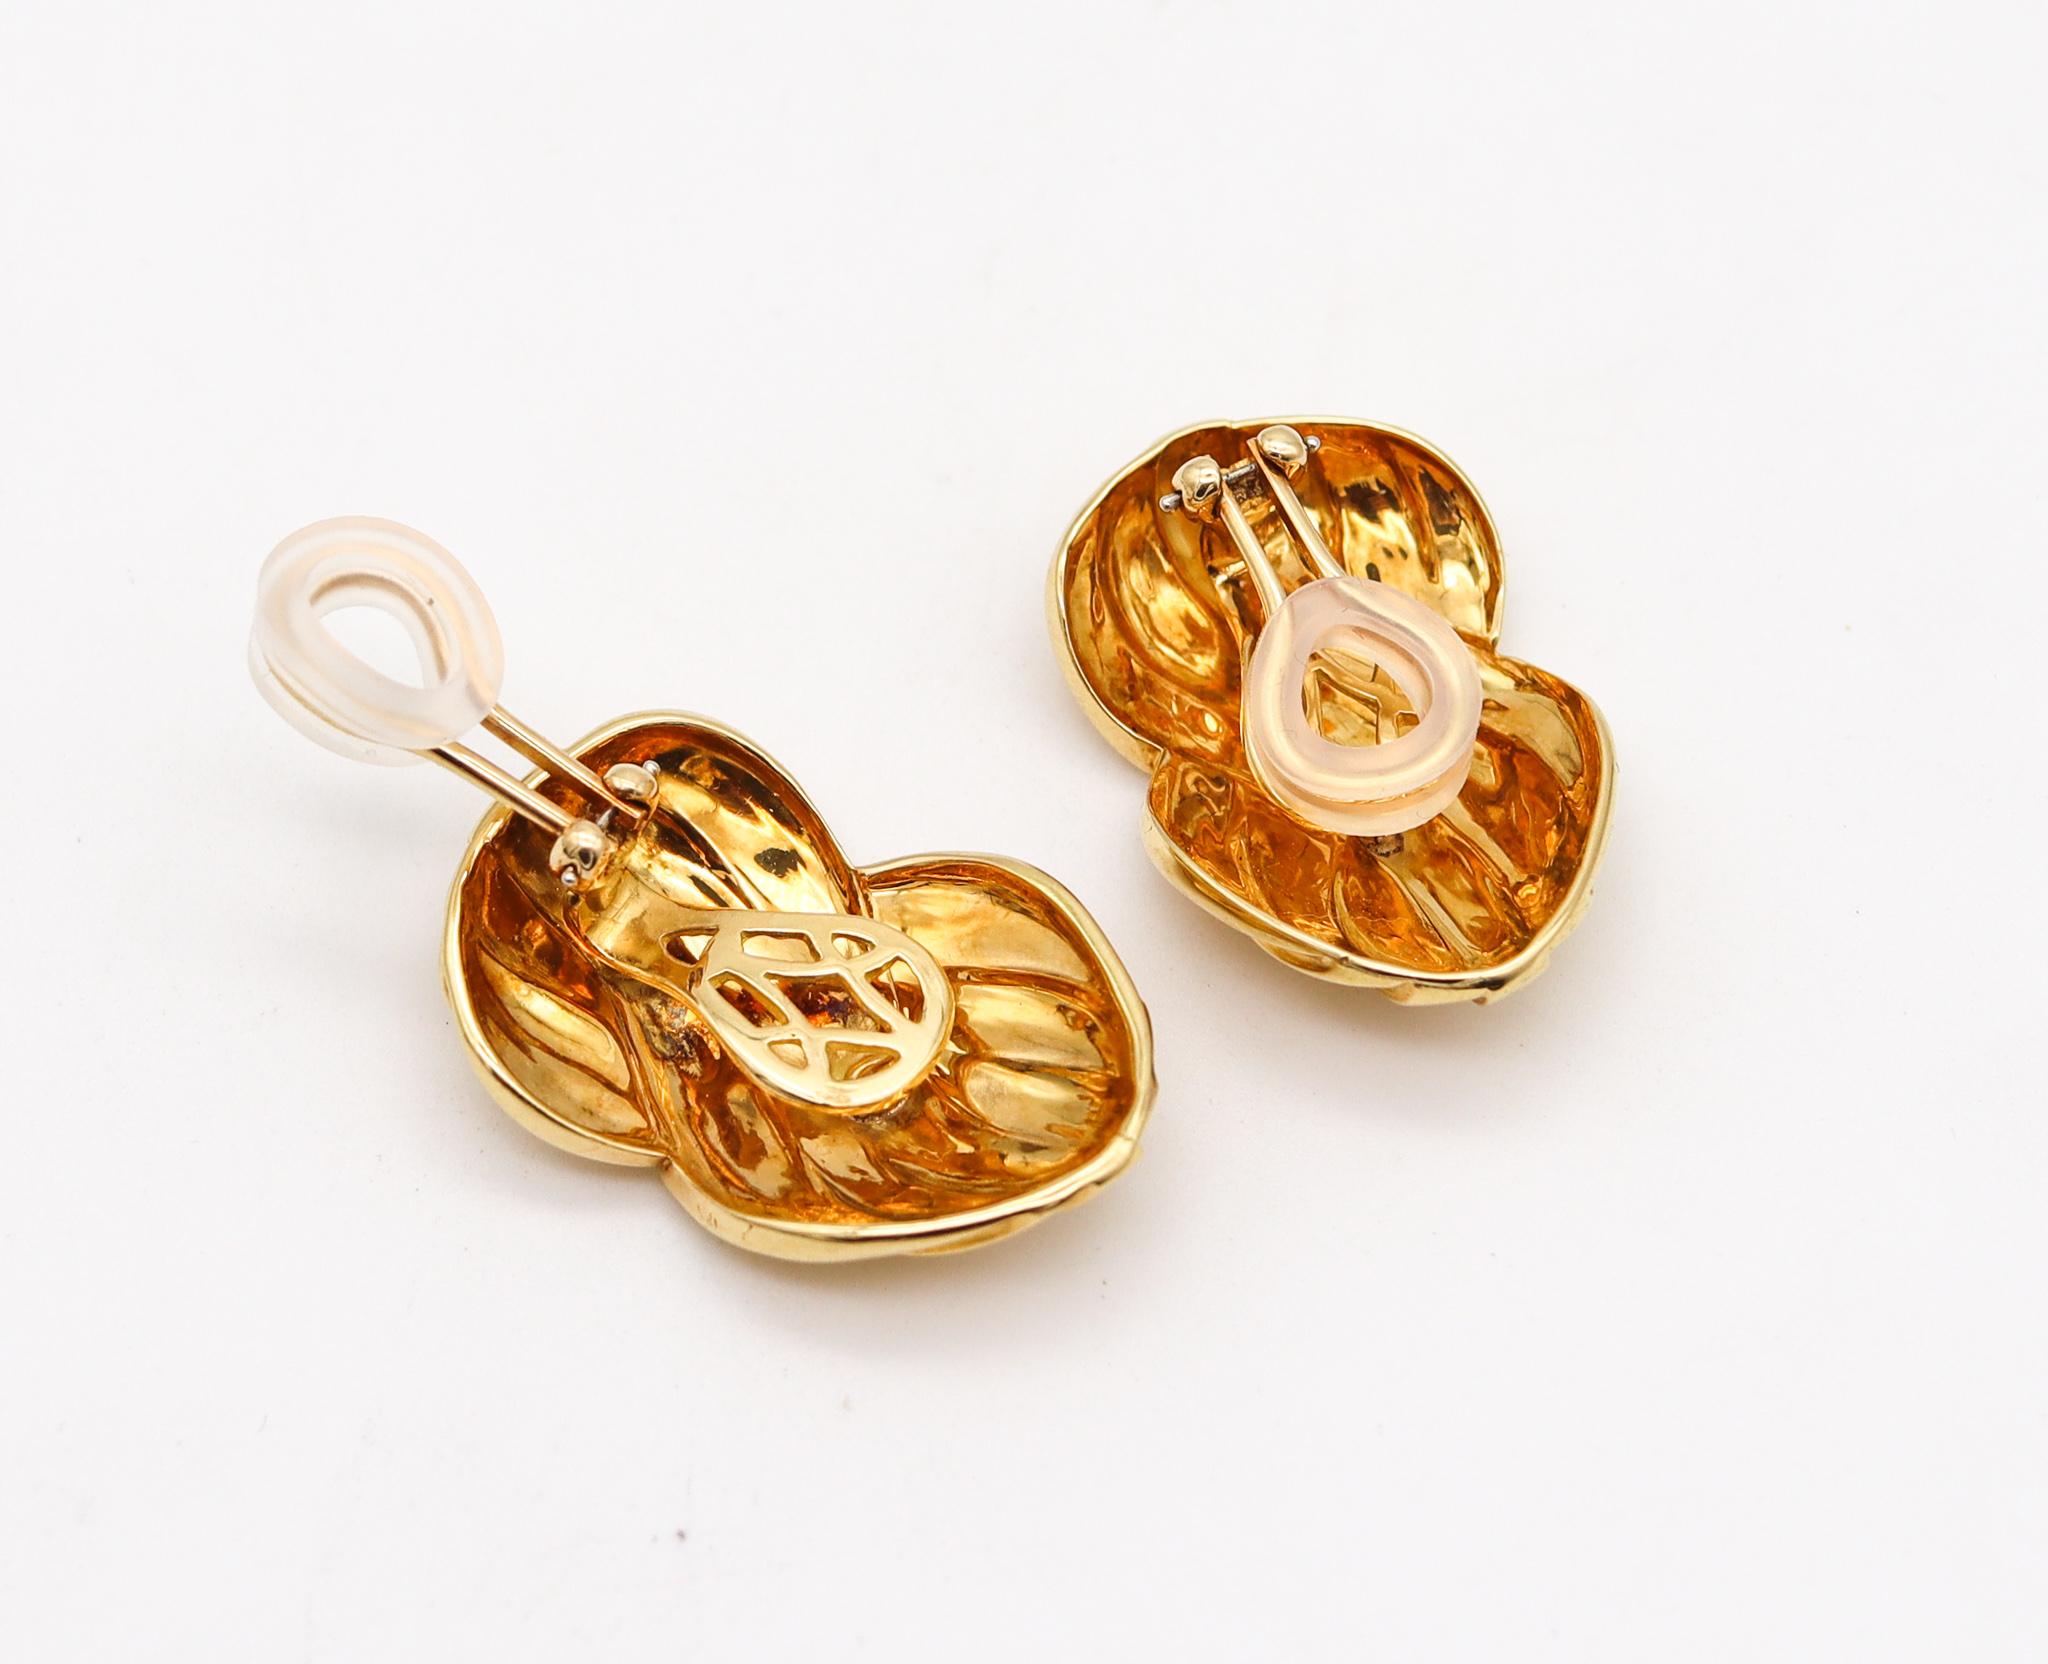 Michael Bondanza Contemporary Knots Clip Earrings in Solid 18Kt Yellow Gold In Excellent Condition For Sale In Miami, FL